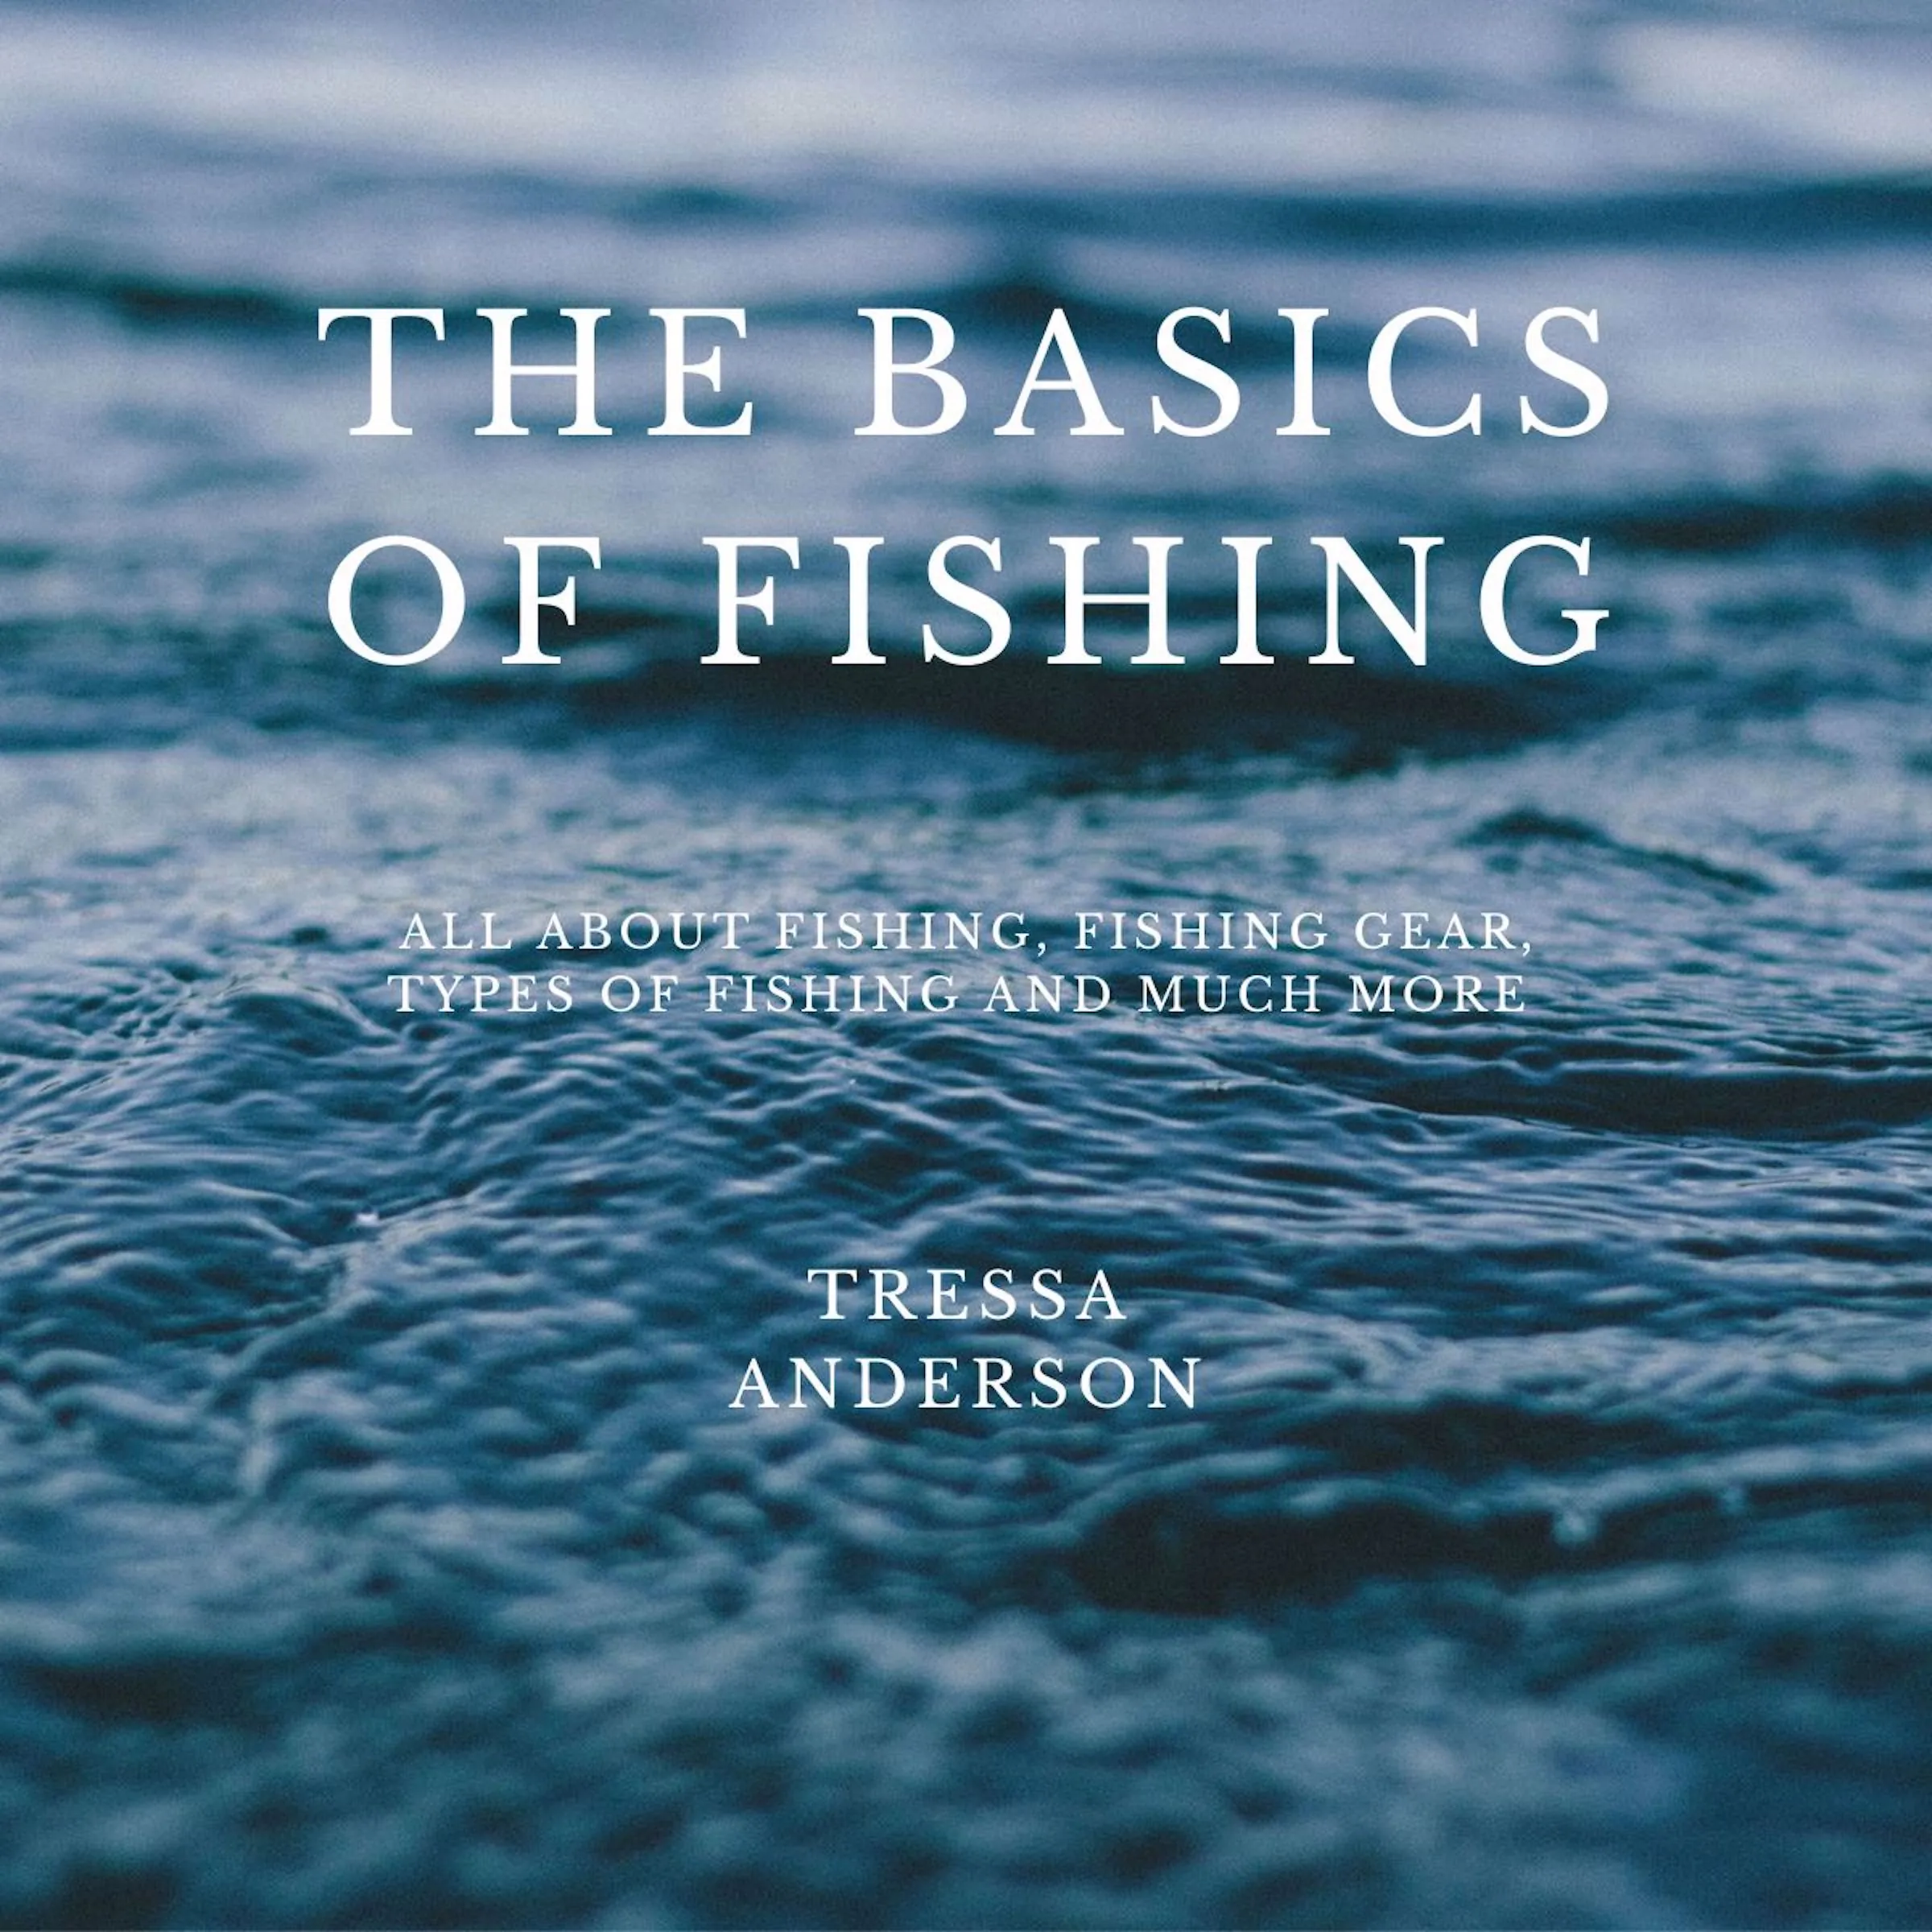 The Basics of Fishing by Tressa Anderson Audiobook